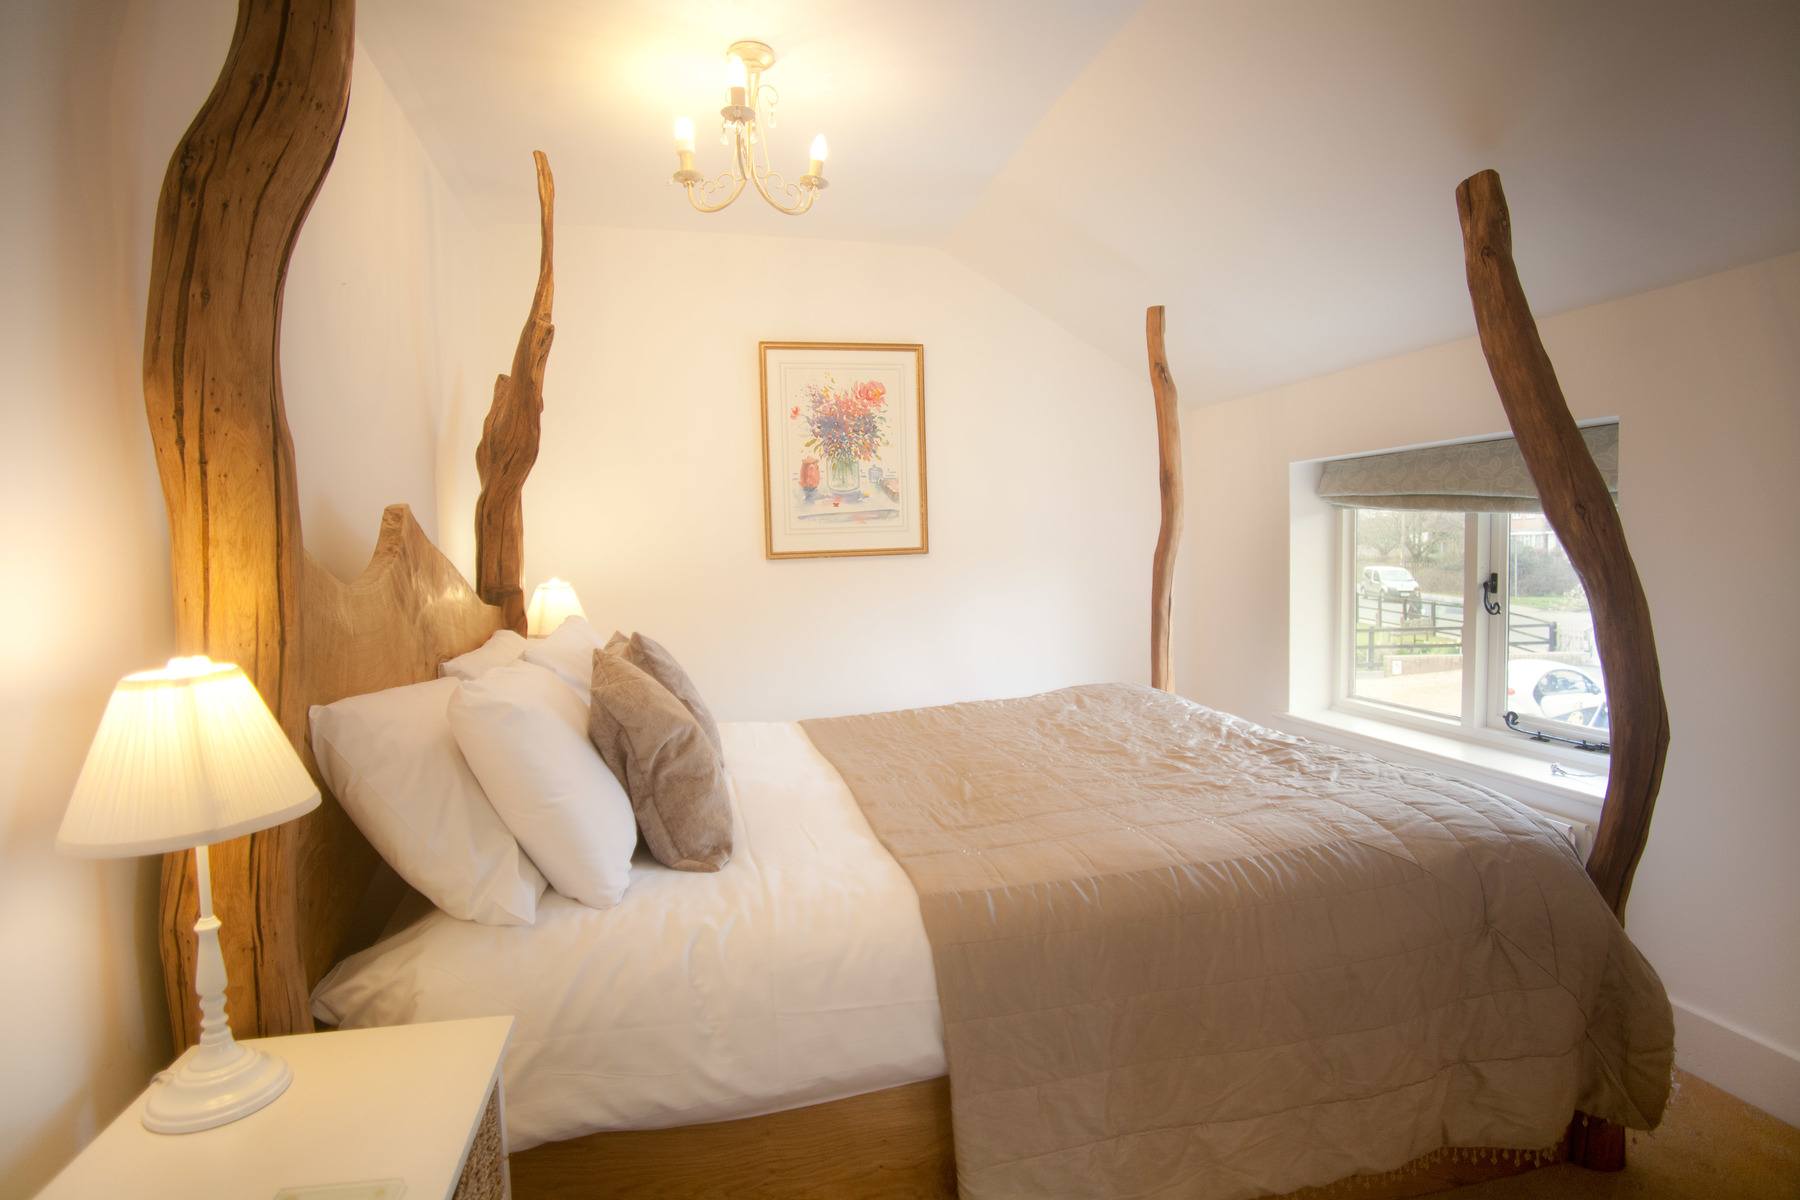 Dinner Bed and Breakfast in the New Forest - Cottage Lodge